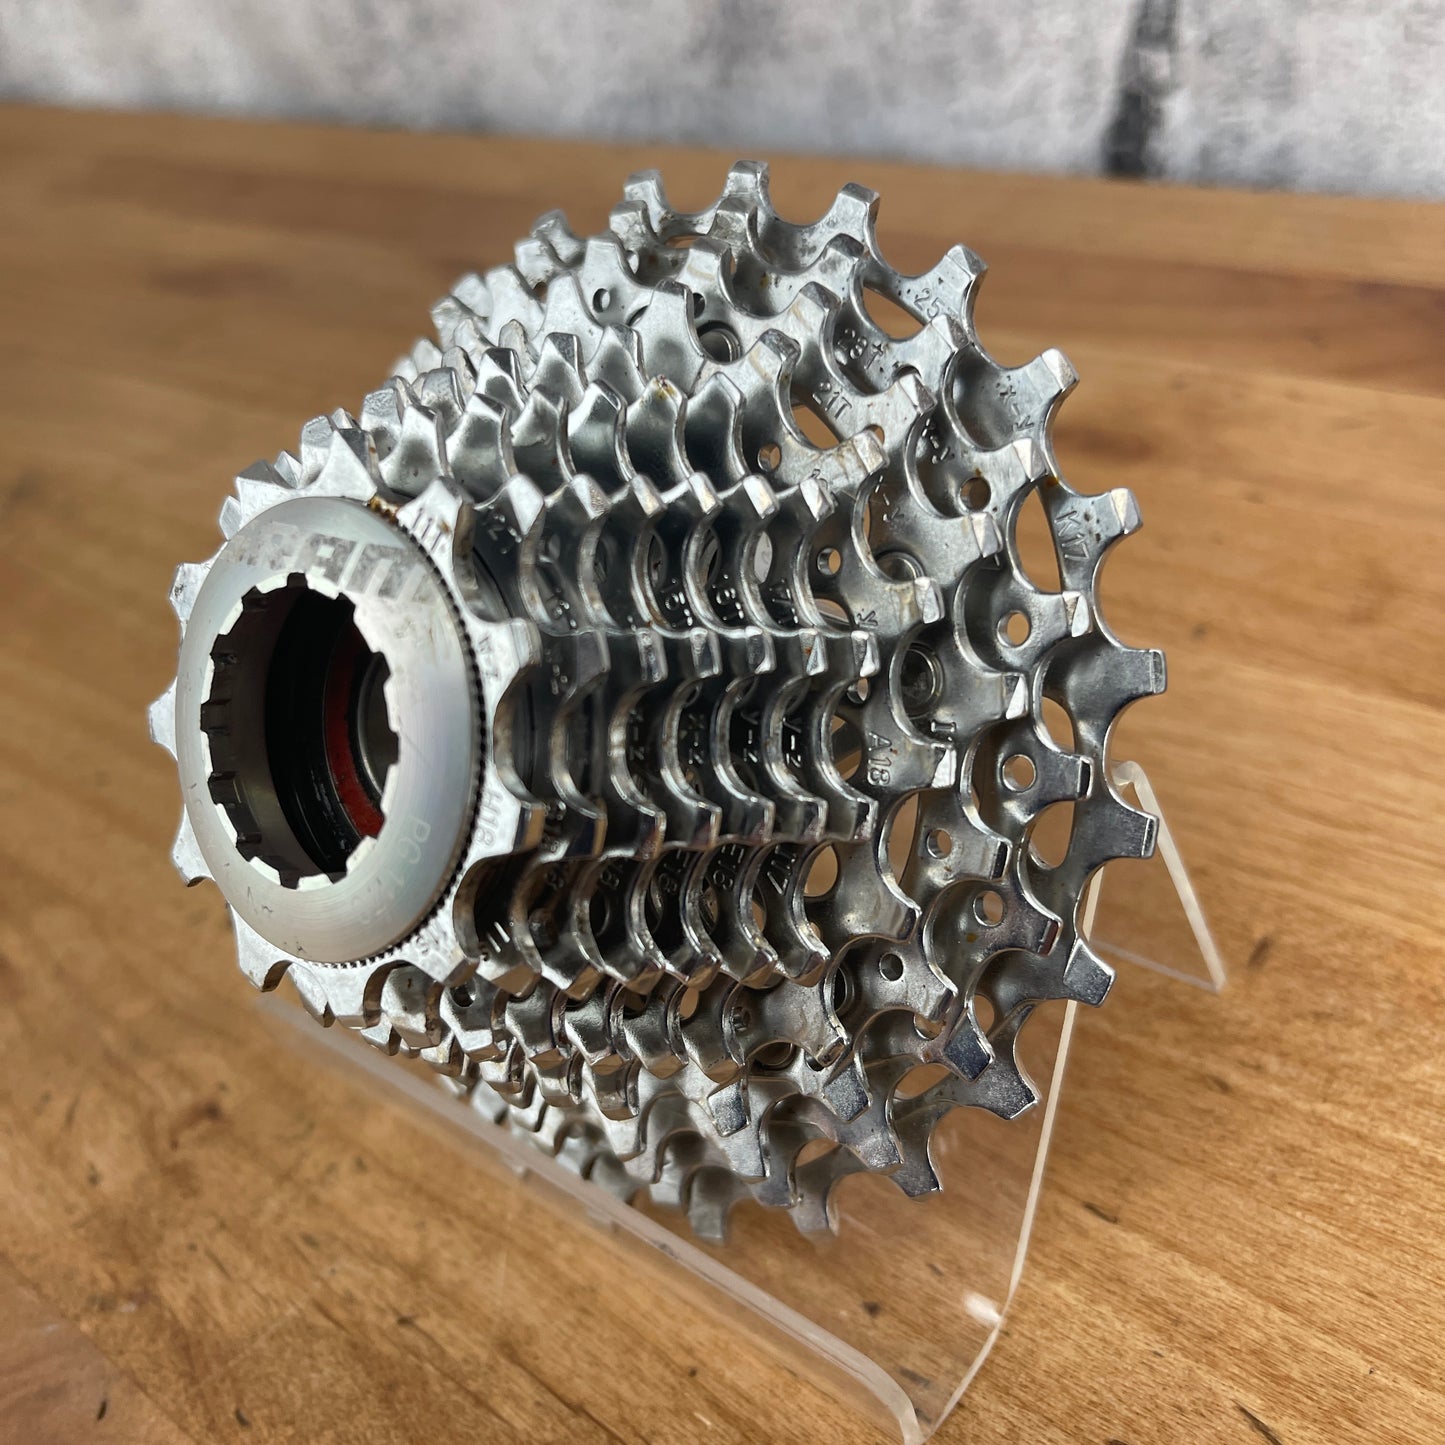 SRAM PG1170 11-Speed 11-25t Bicycle Cassette "Typical Wear" 243g